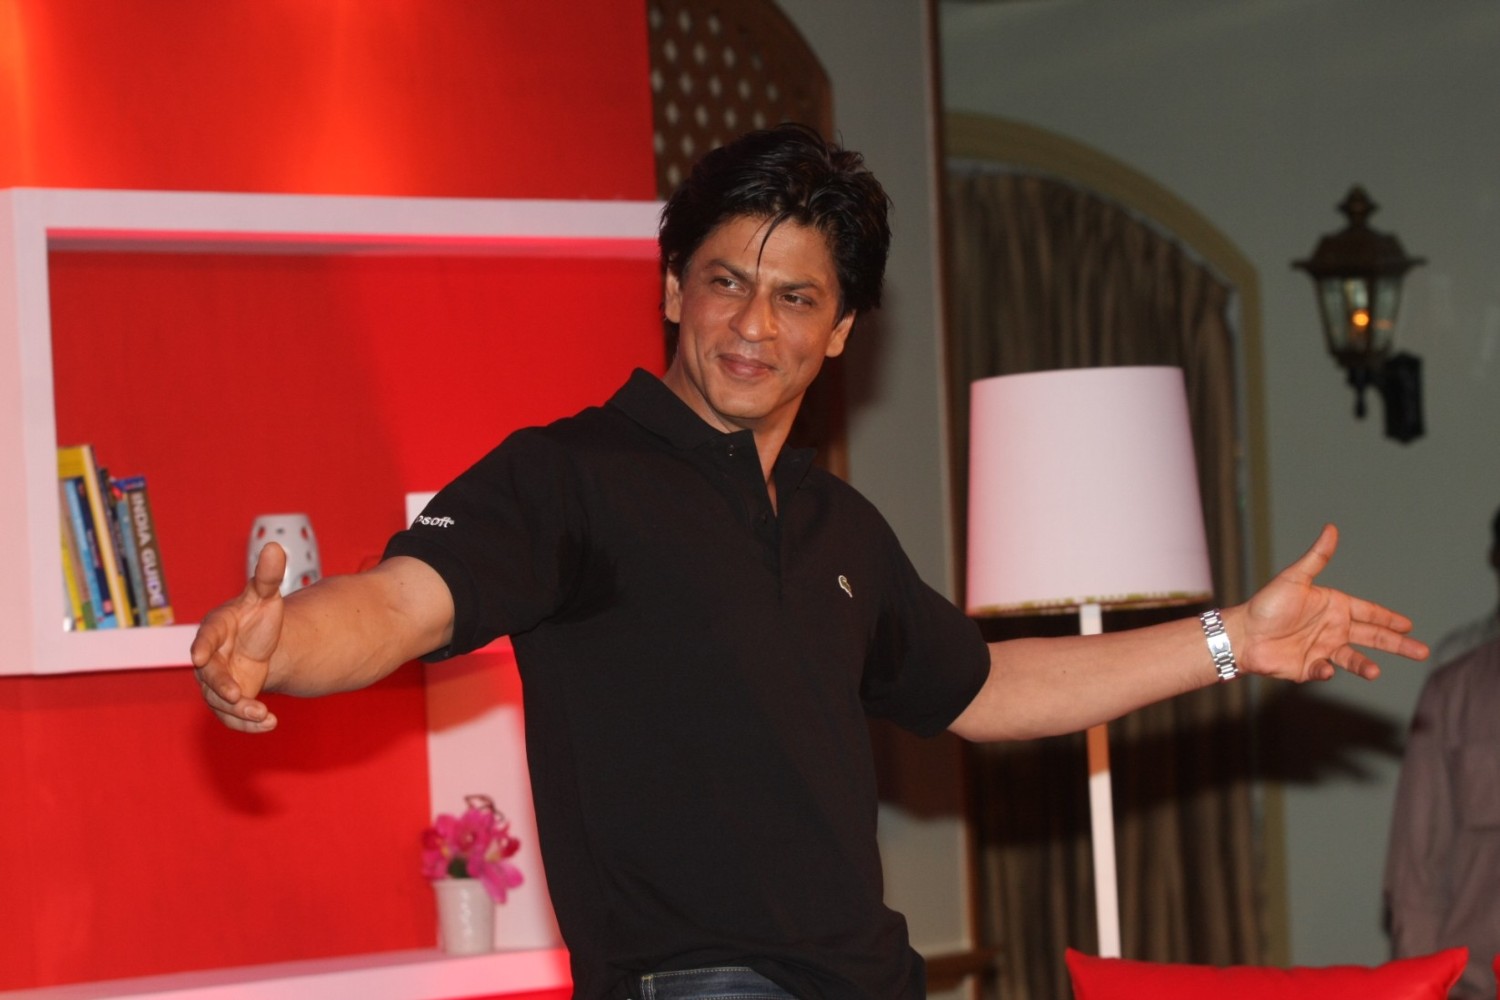 Shah Rukh Khan: How Bollywood's romance king became an action star